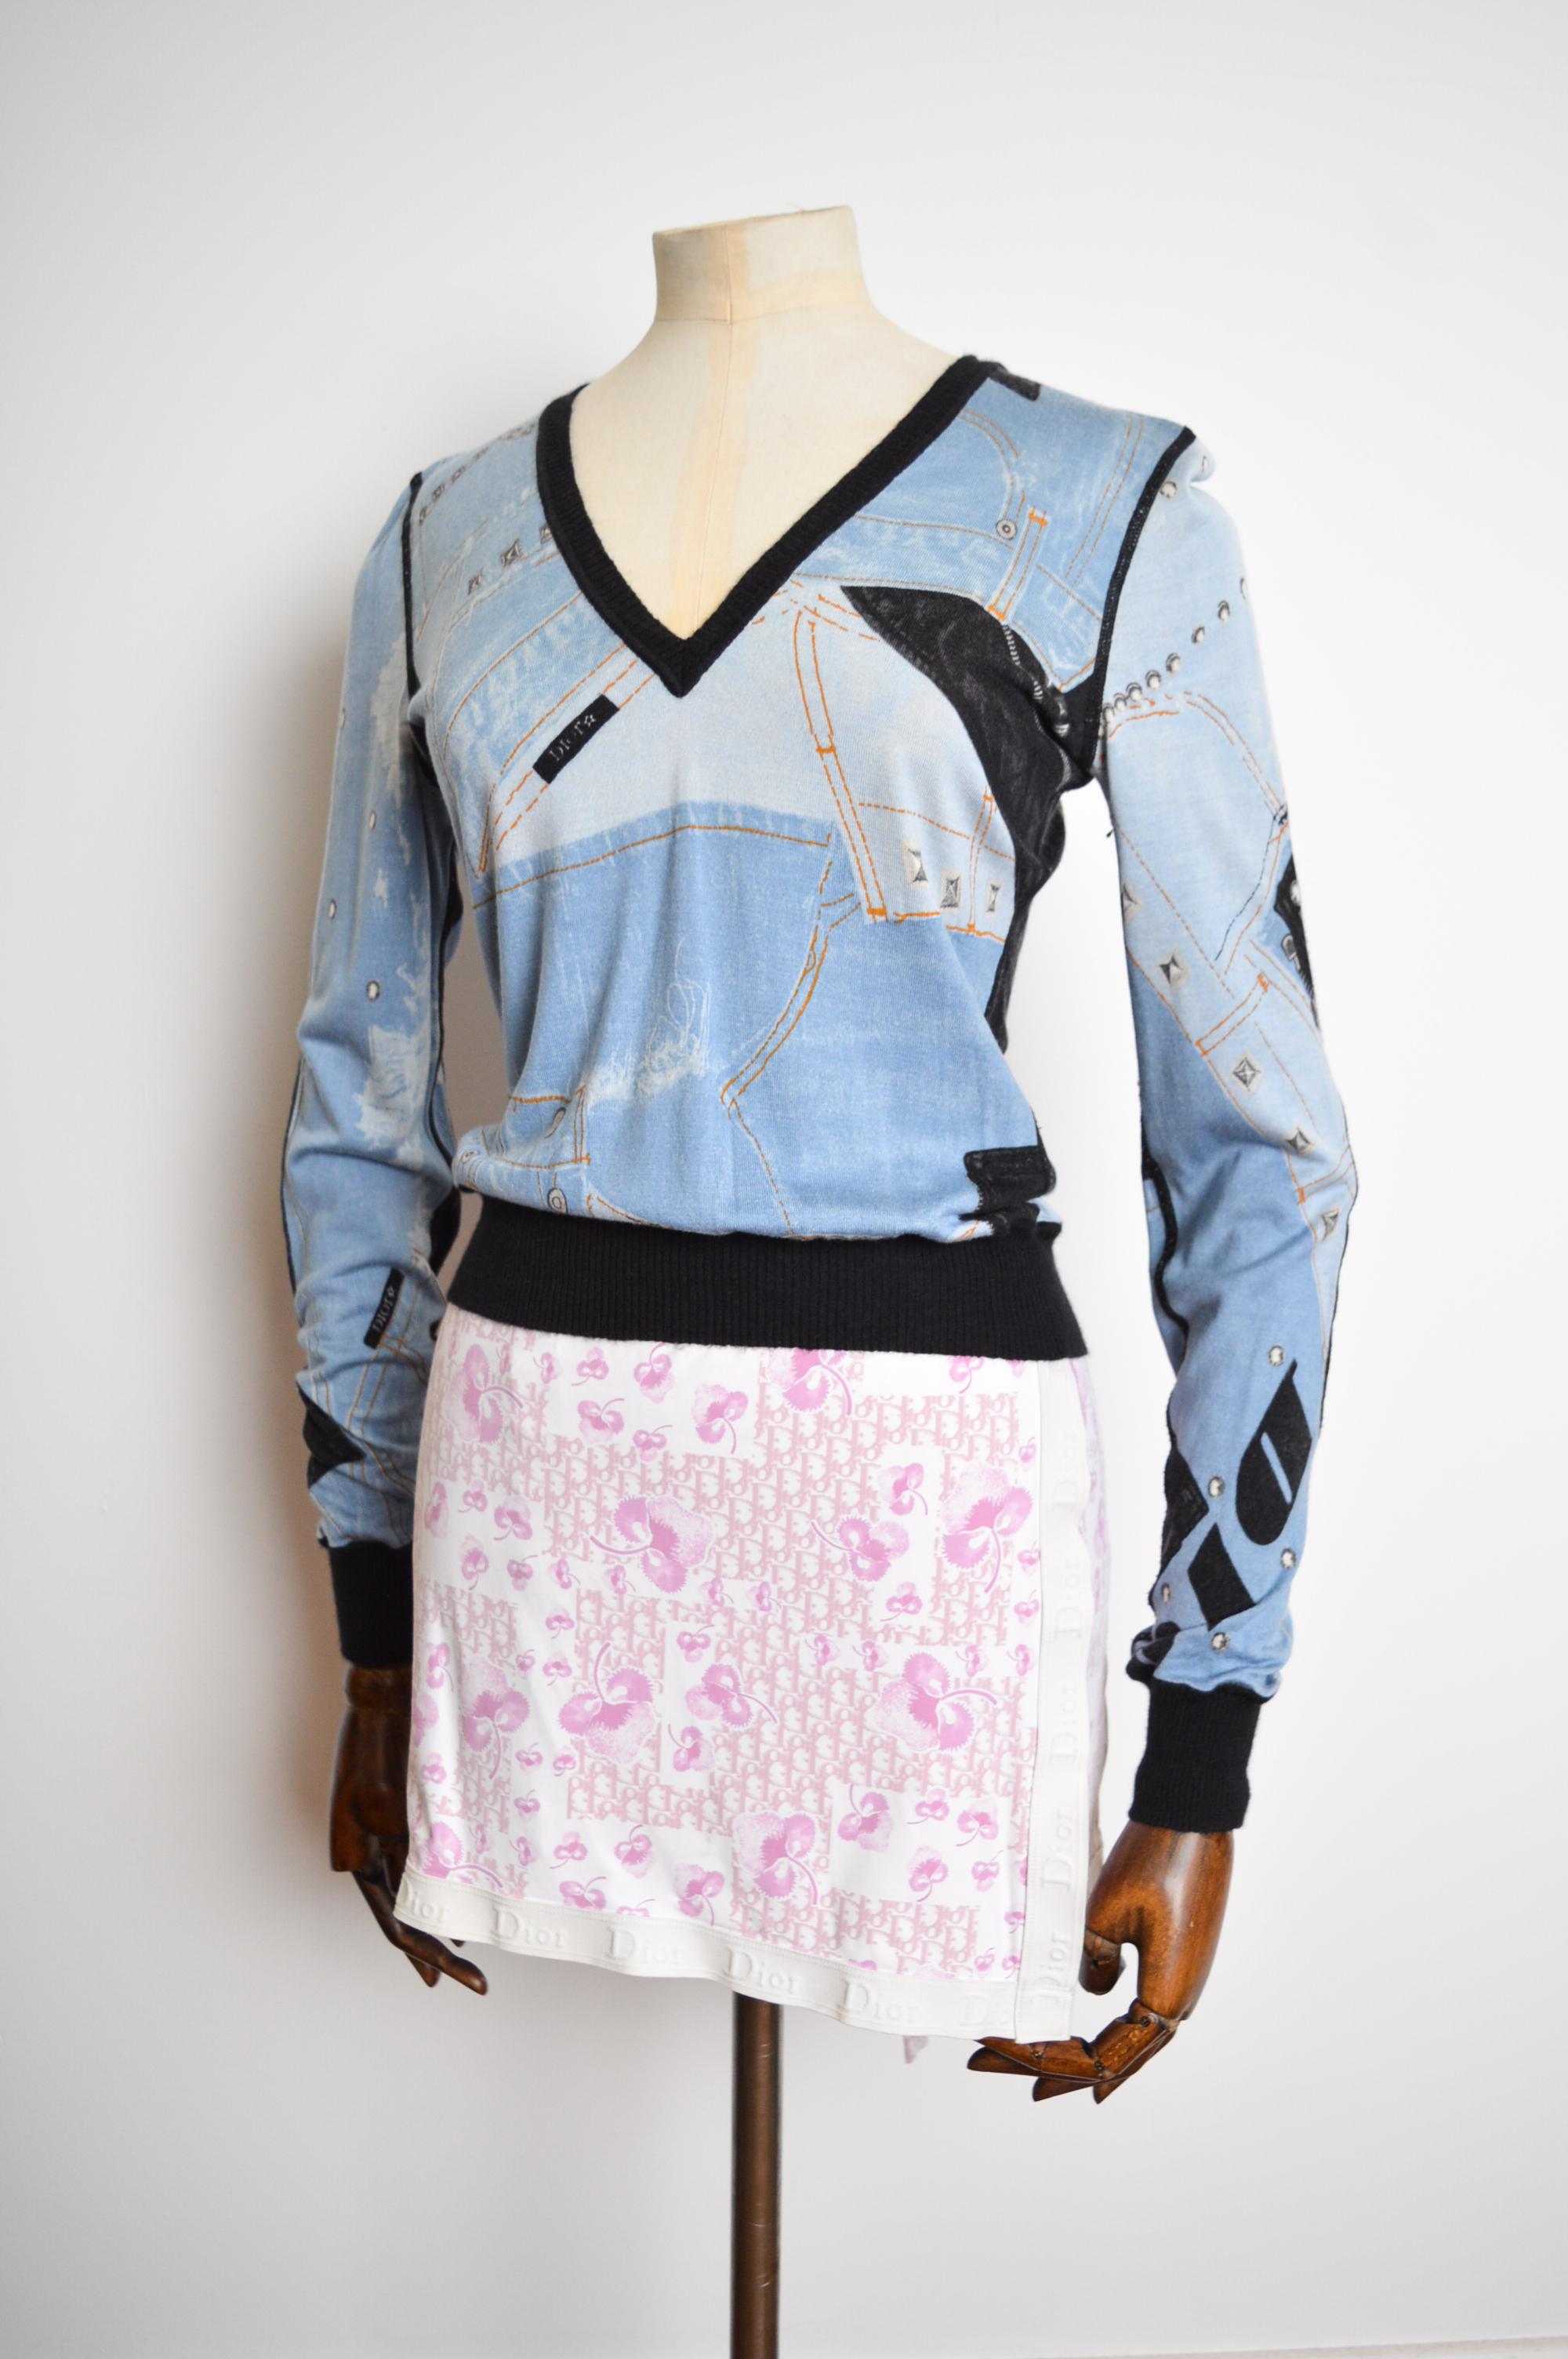 Vintage Fall / Winter 2004 Cashmere & Wool blend sweater by John Galliano for Christian Dior, in an Iconic denim trompe l'oeil print.

MADE IN FRANCE 

40% Wool
30% Silk
30% Cashmere 

Measurements in Inches - 
Pit to Pit -18